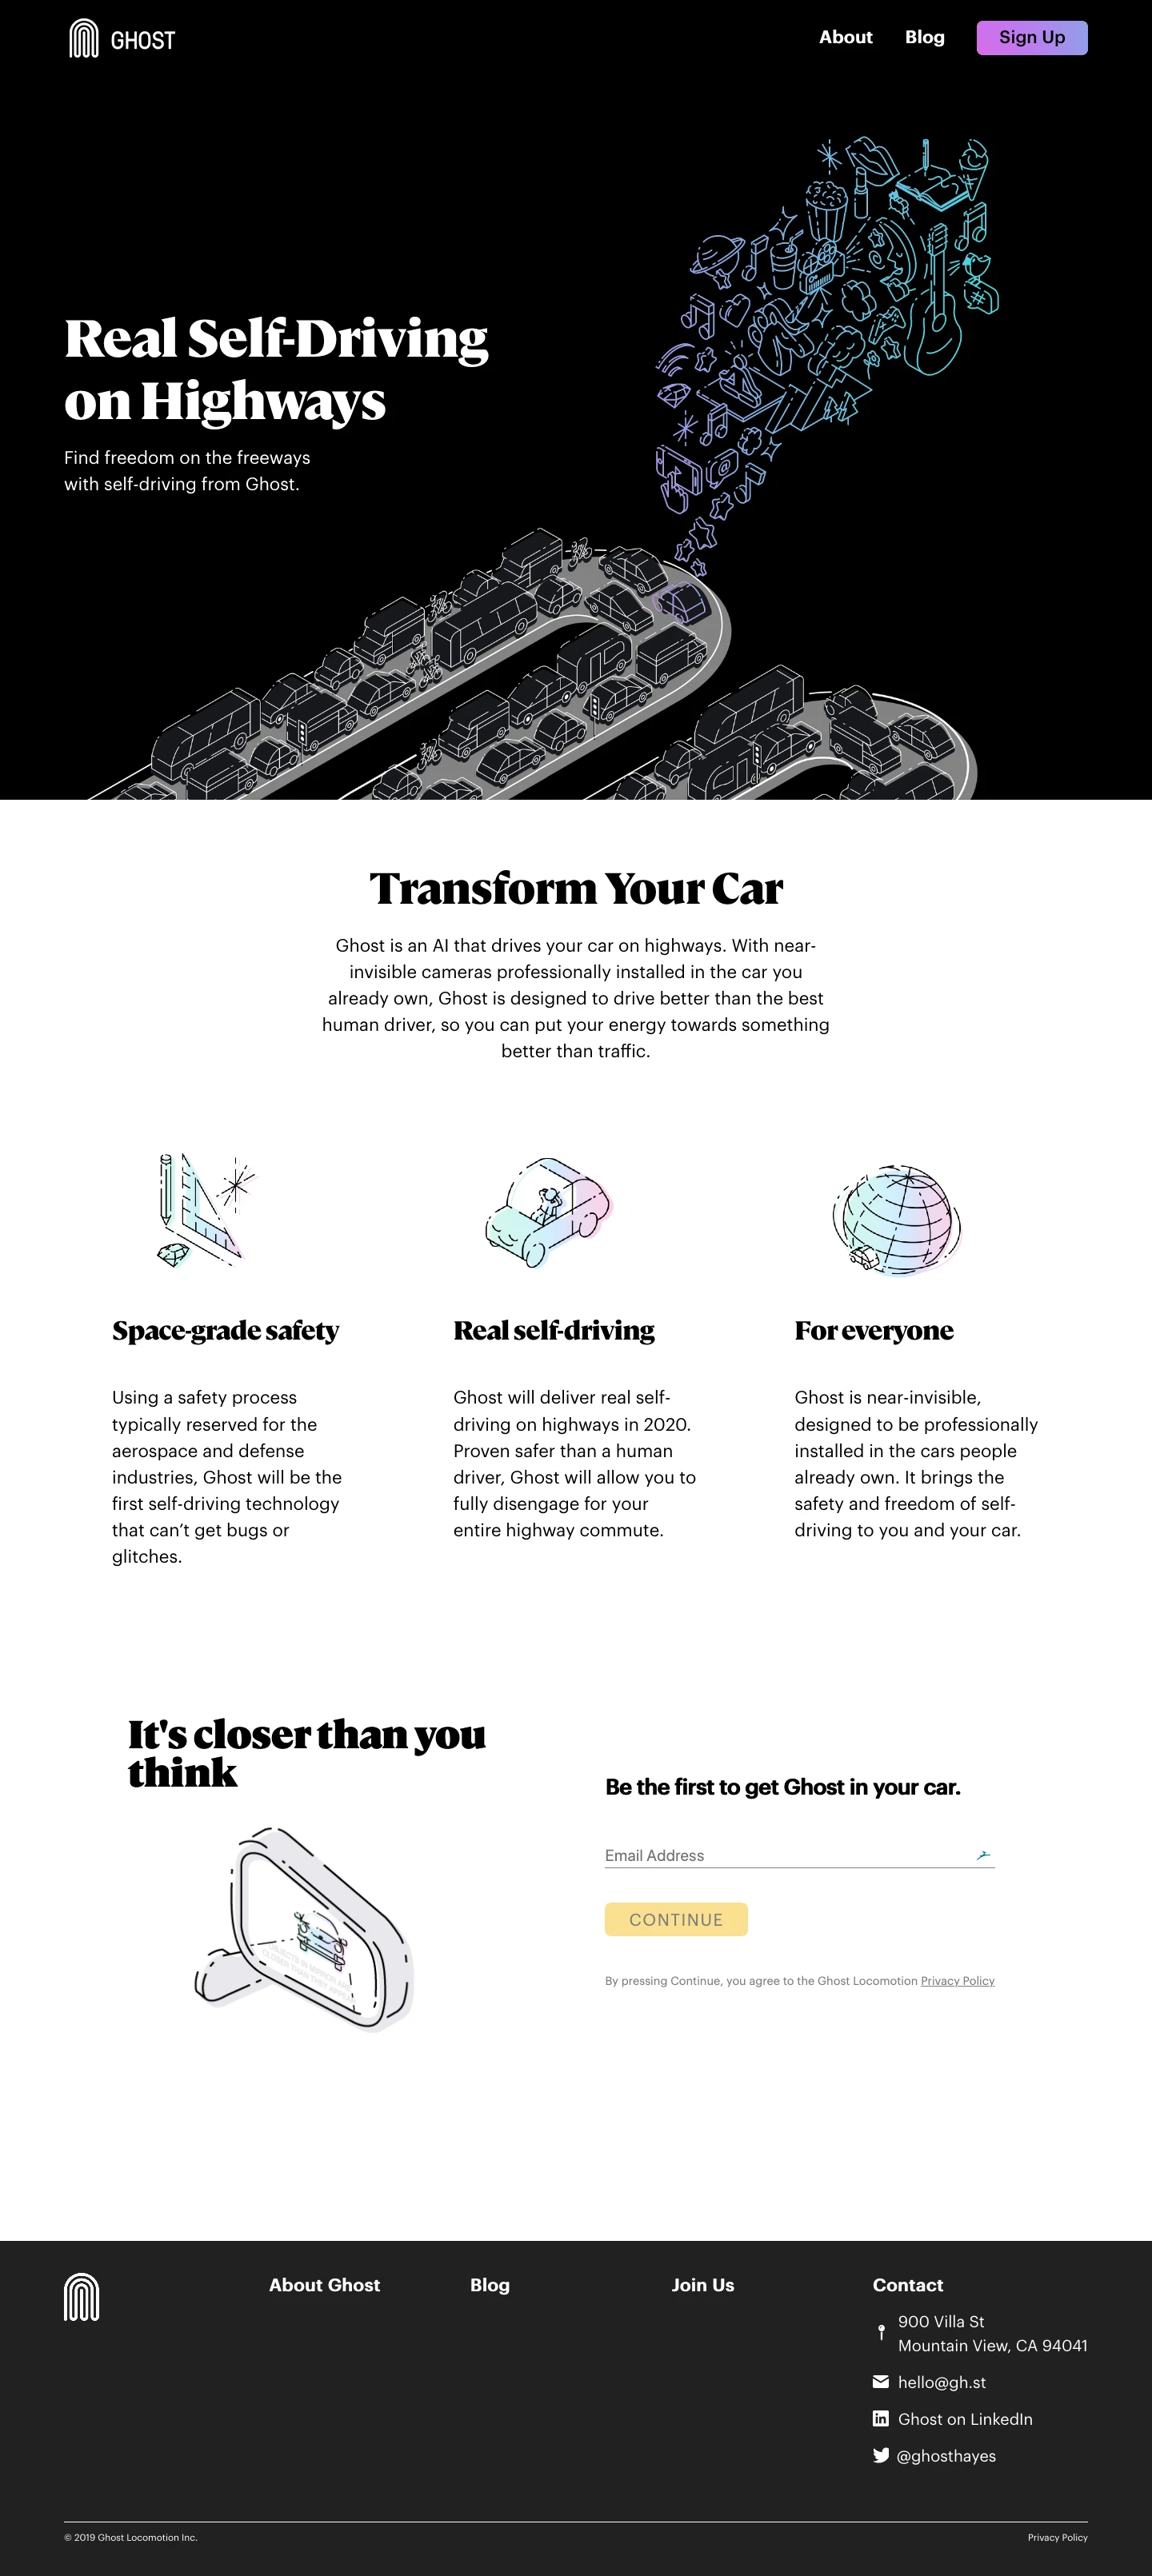 Ghost Locomotion Landing Page Example: Ghost is an AI that drives your car on highways. With near-invisible cameras professionally installed in the car you already own, Ghost is designed to drive better than the best human driver, so you can put your energy towards something better than traffic.